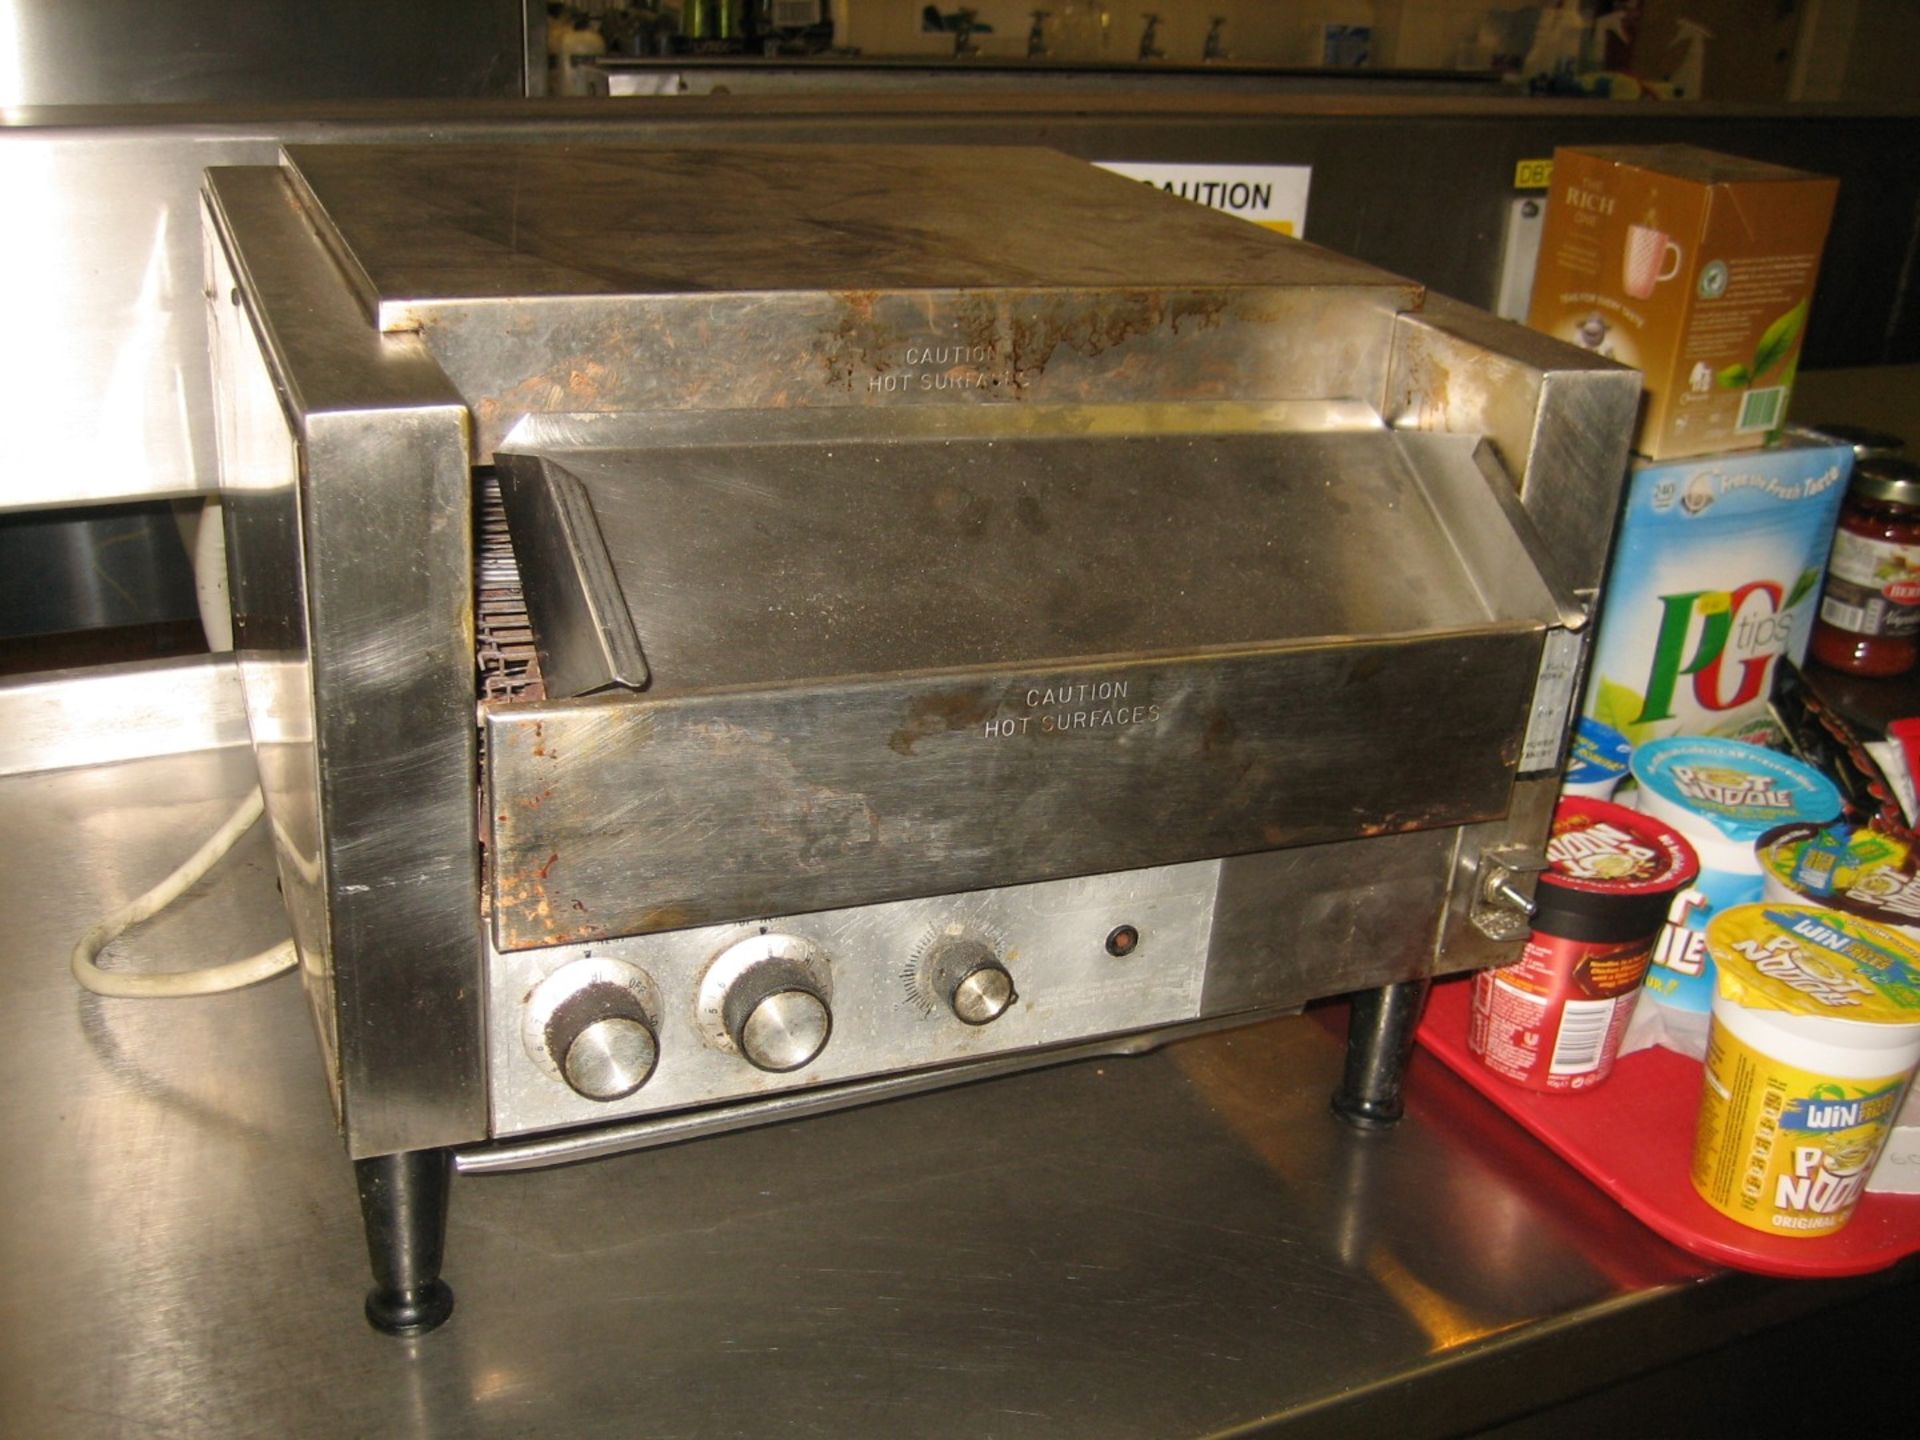 Stainless steel conveyor type toaster (Lift out £10)